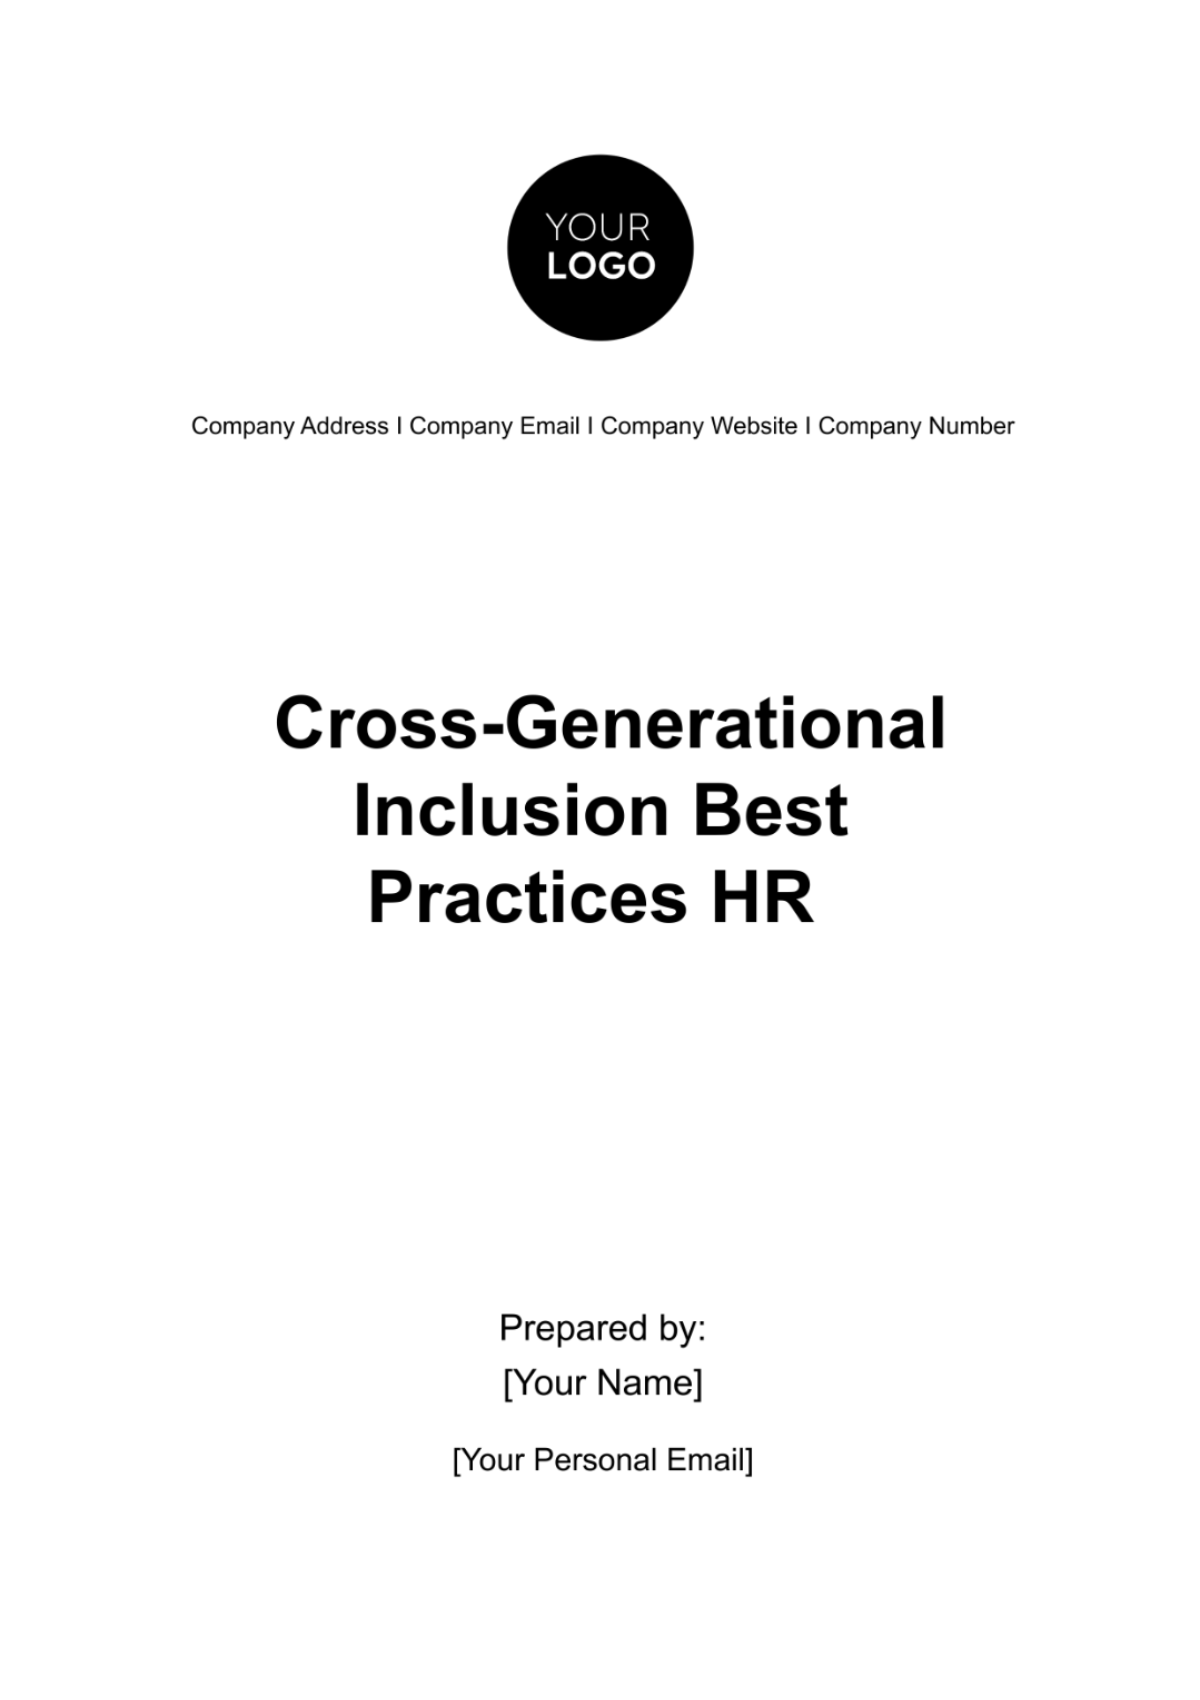 Free Cross-Generational Inclusion Best Practices HR Template